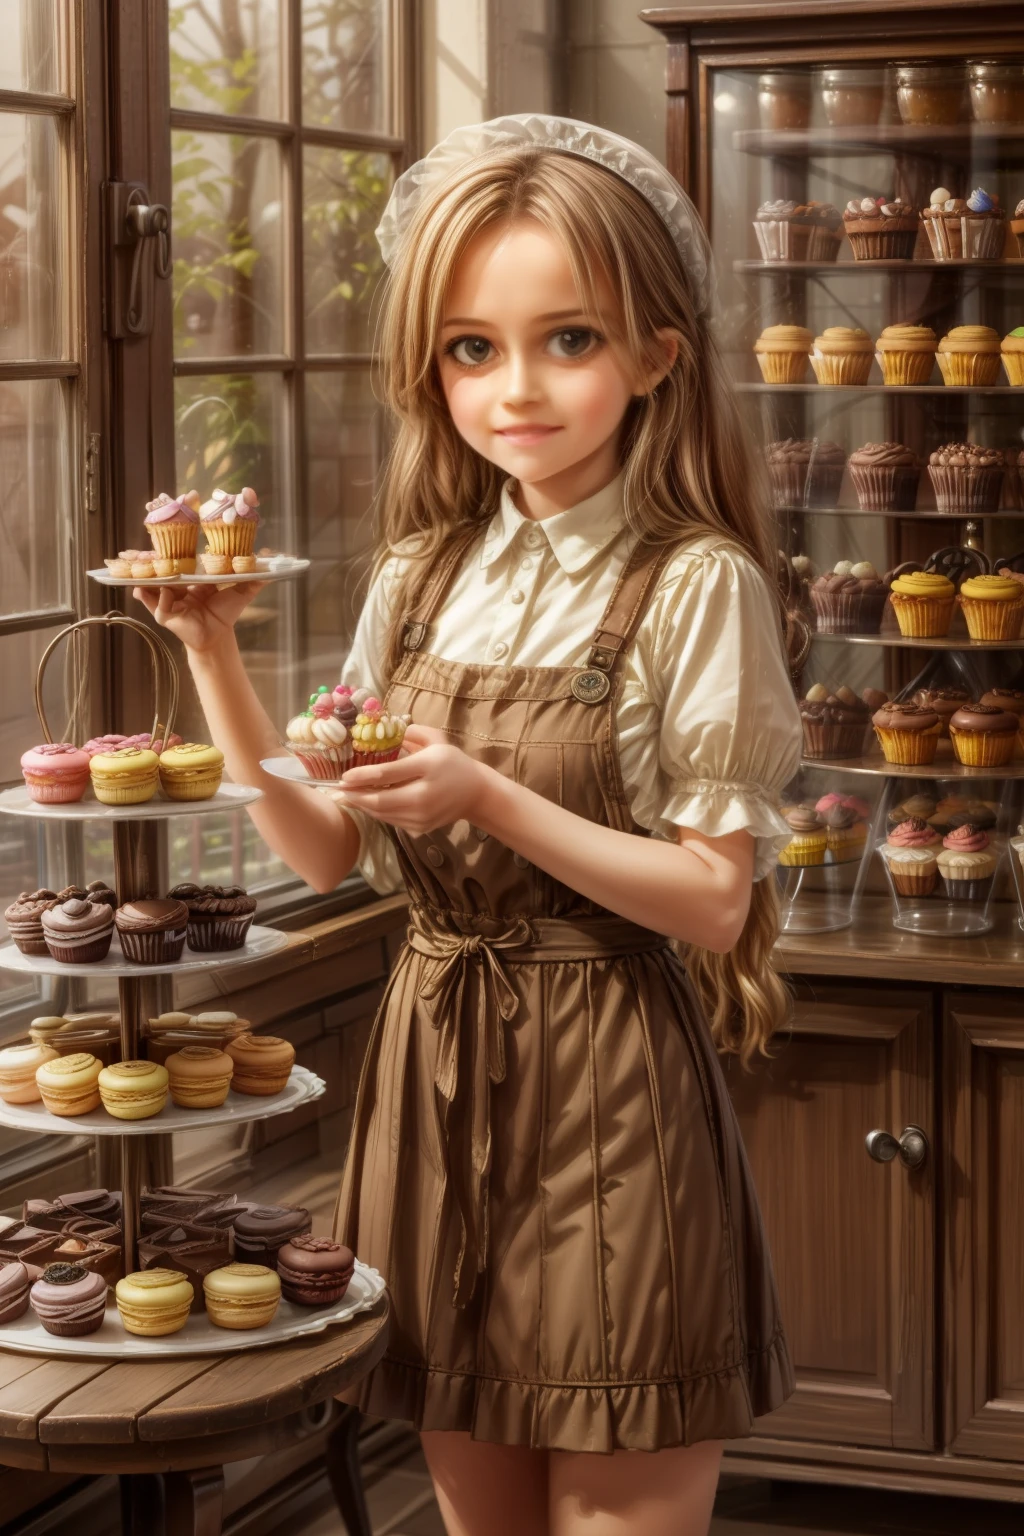 masterpiece, highly detailed, (chibi:1.3), , (1girl), blonde hair, pastel colors, cozy atmosphere, dessert display case, macarons, cupcakes, tarts, cakes, coffee machine, chalkboard menu, natural lighting, glass jars filled with candy, frosted window panes, decorative plates, whimsical decor, 
